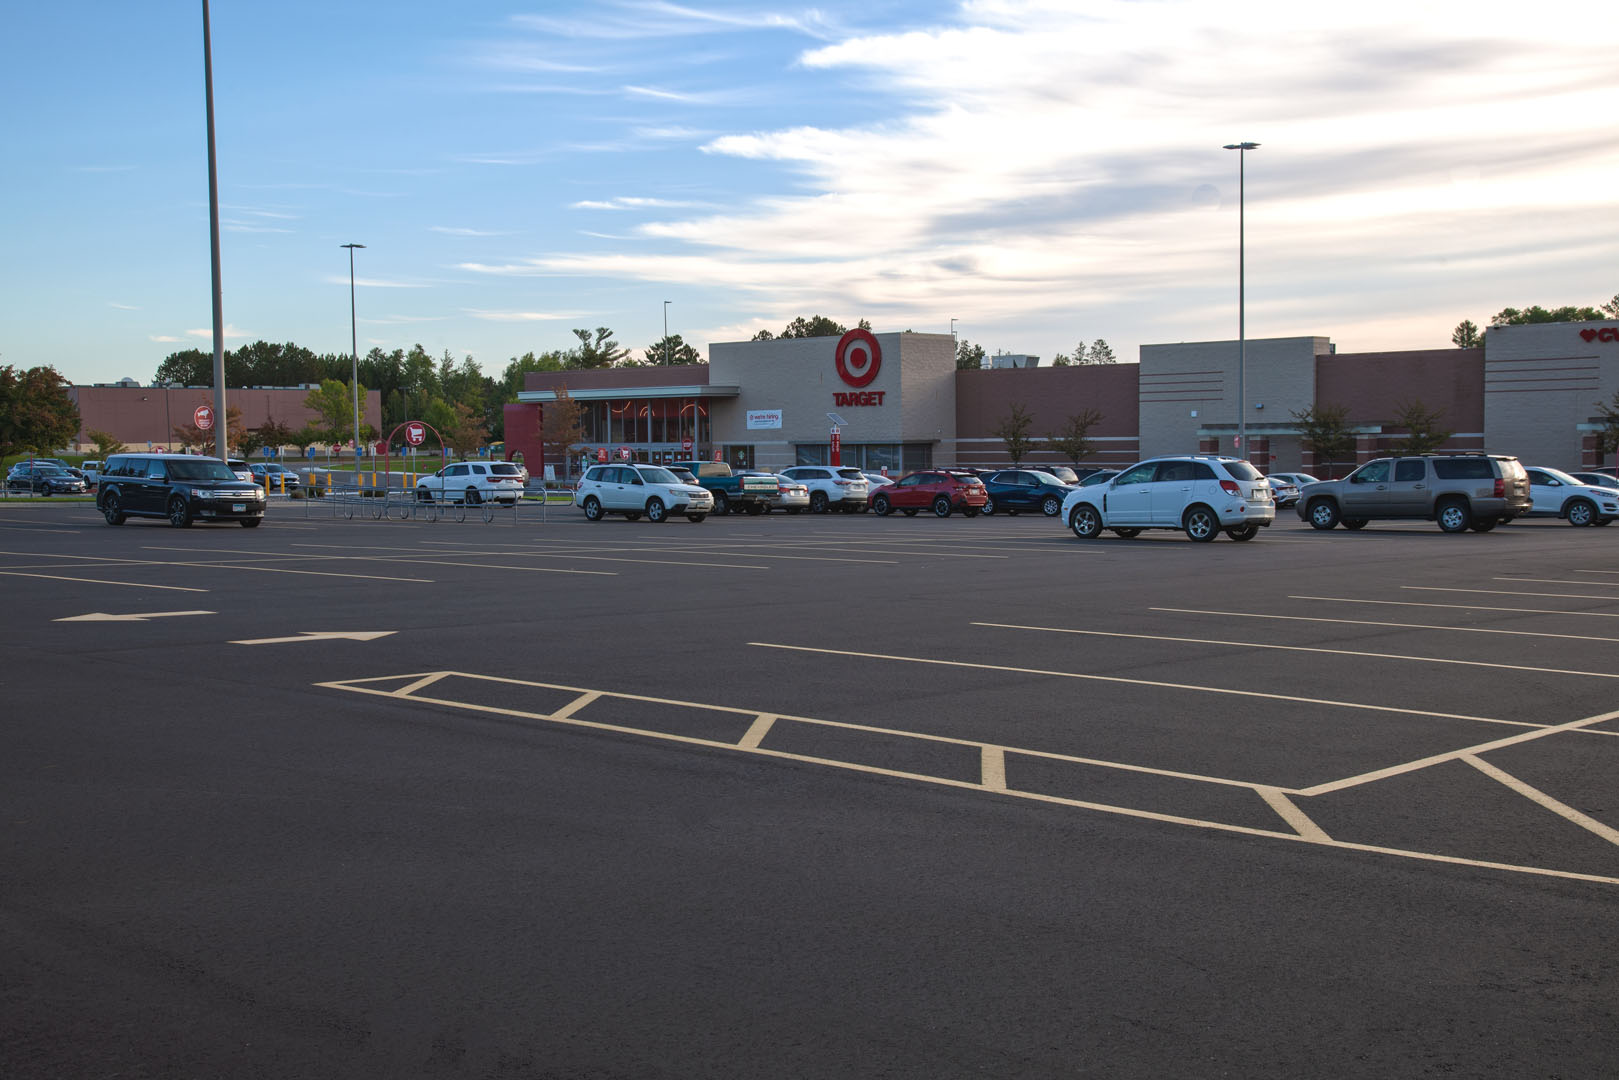 Commercial paved parking lot for Target store